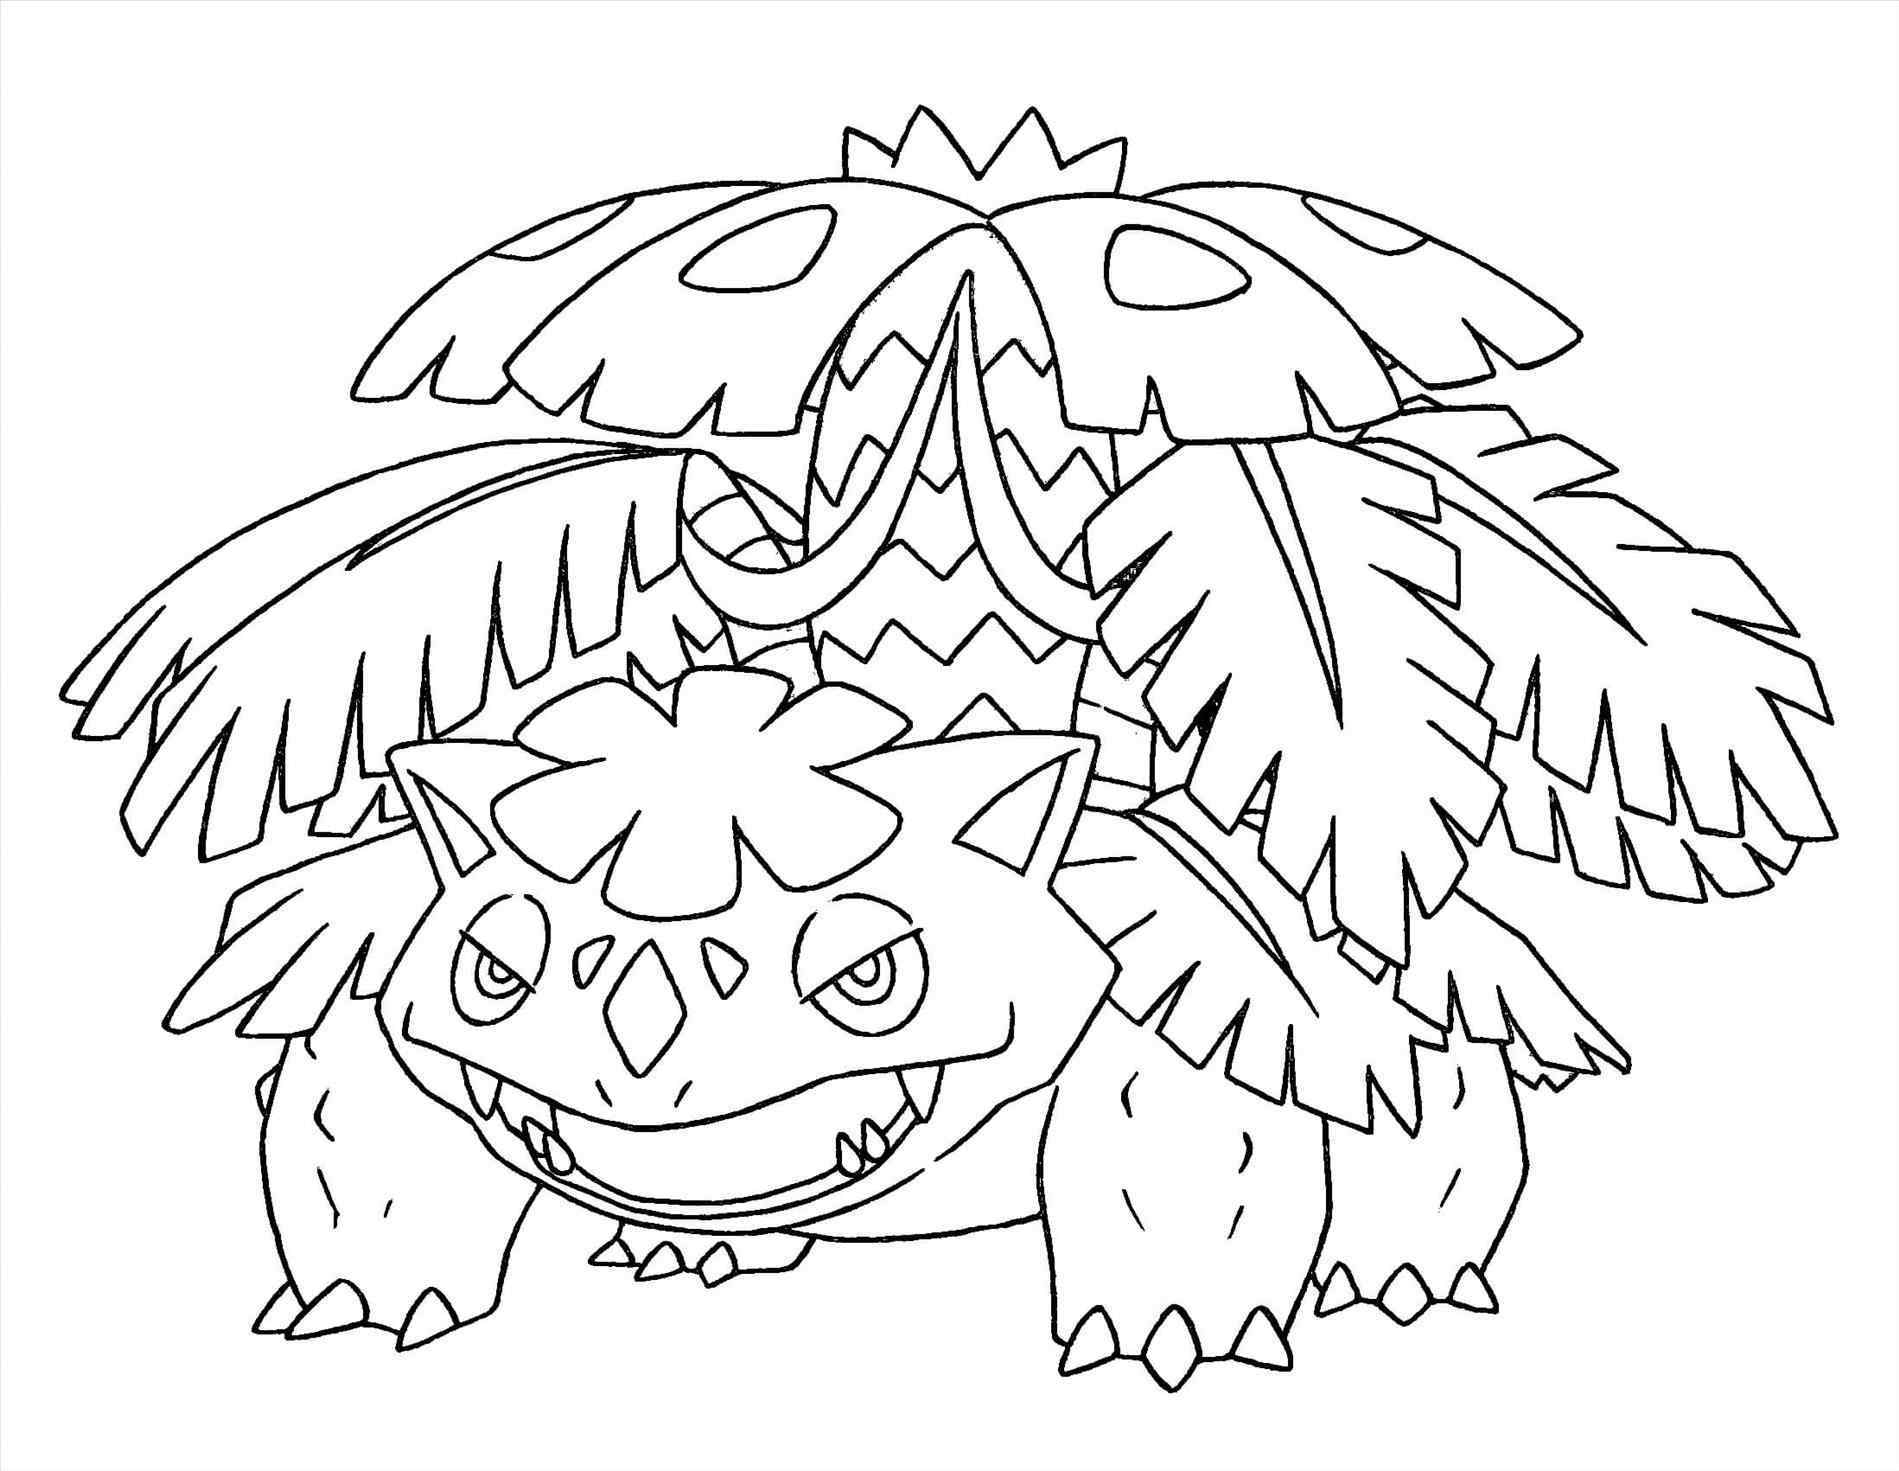 Pokemon Xy Coloring Pages at GetColorings.com | Free ...